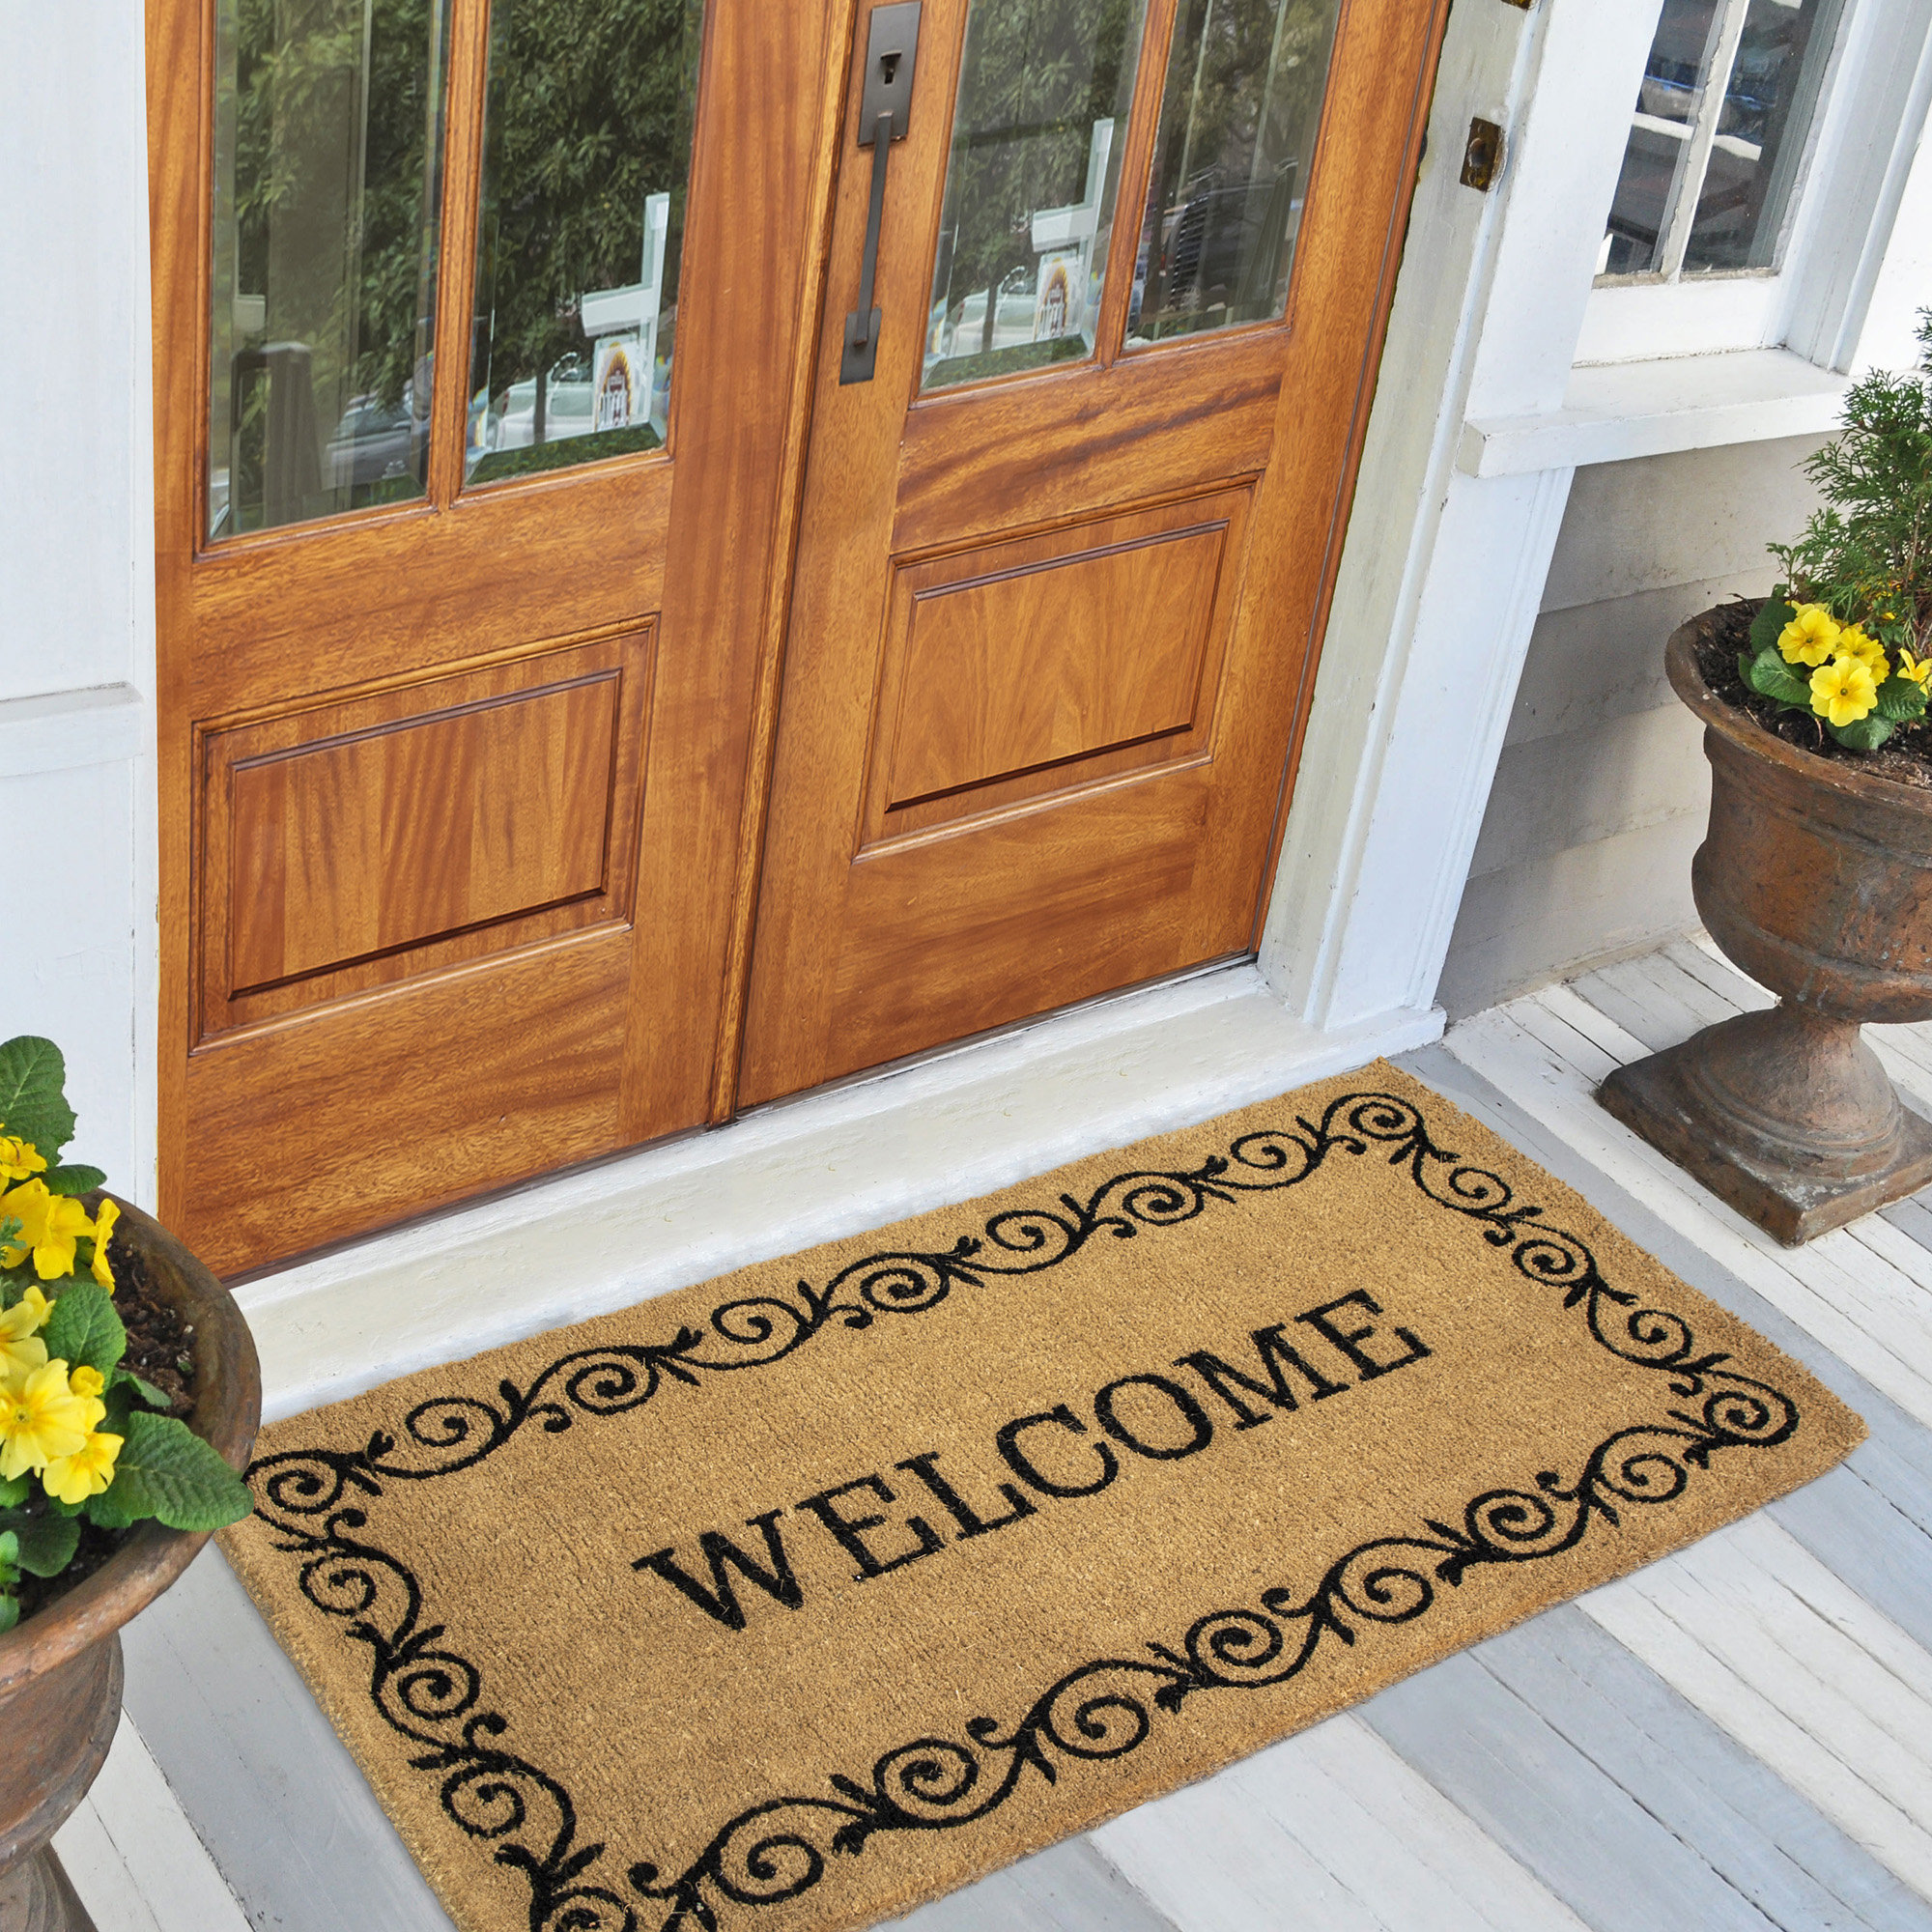 A1hc Rubber & Coir Monogrammed Door Mat for Front Door, 24x39, Anti-Shed Treated Durable Doormat for Outdoor Entrance, Heavy Duty, Thin Profile Easy